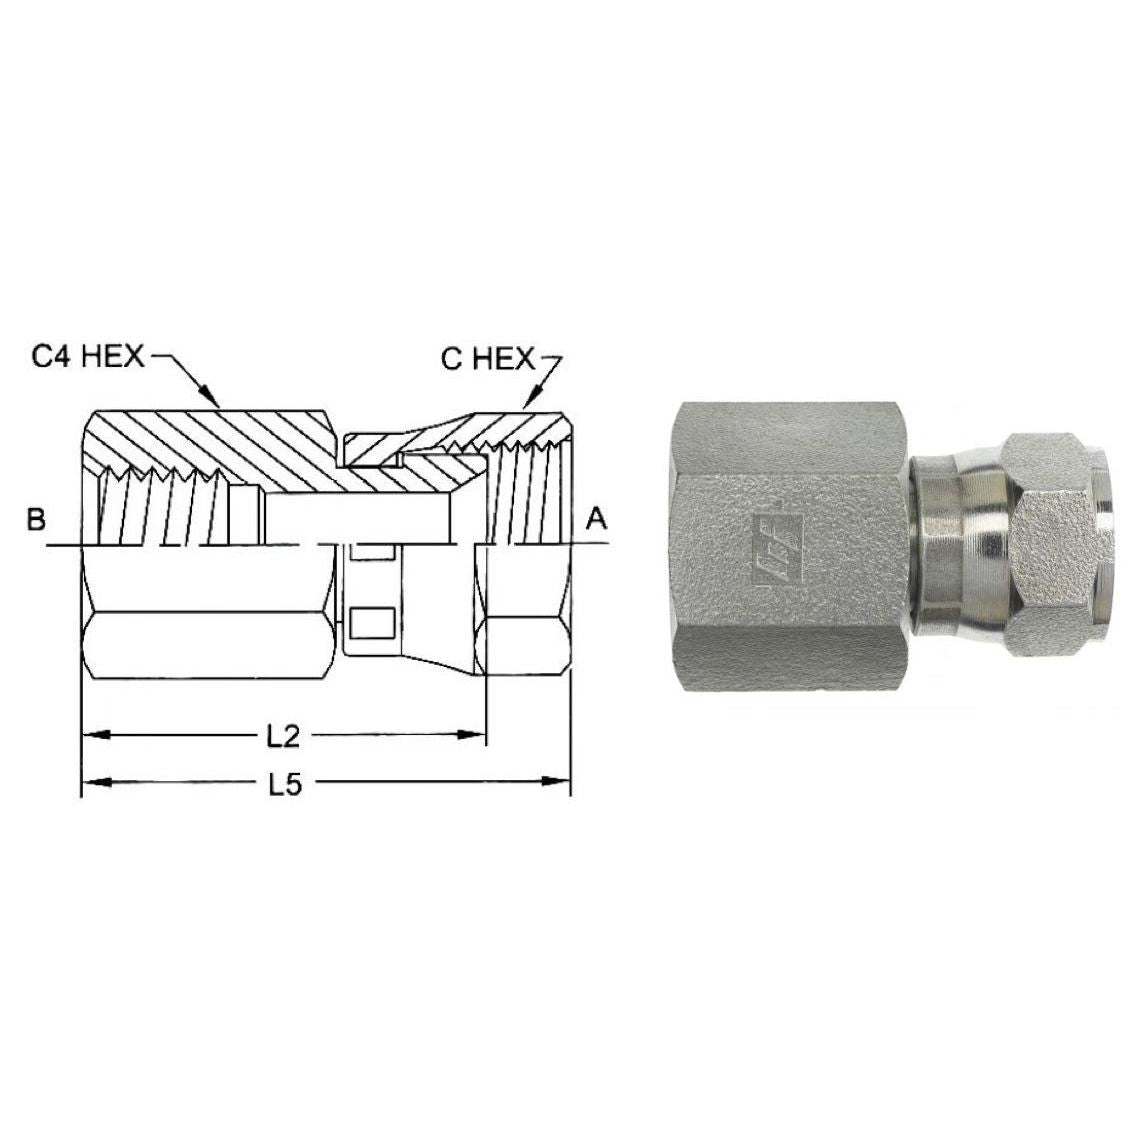 6506-06-04-SS : OneHydraulicsAdapter, Straight, 0.375 (3/8") Female JIC x 0.25 (1/4") Female, Stainless Steel, 6000psi